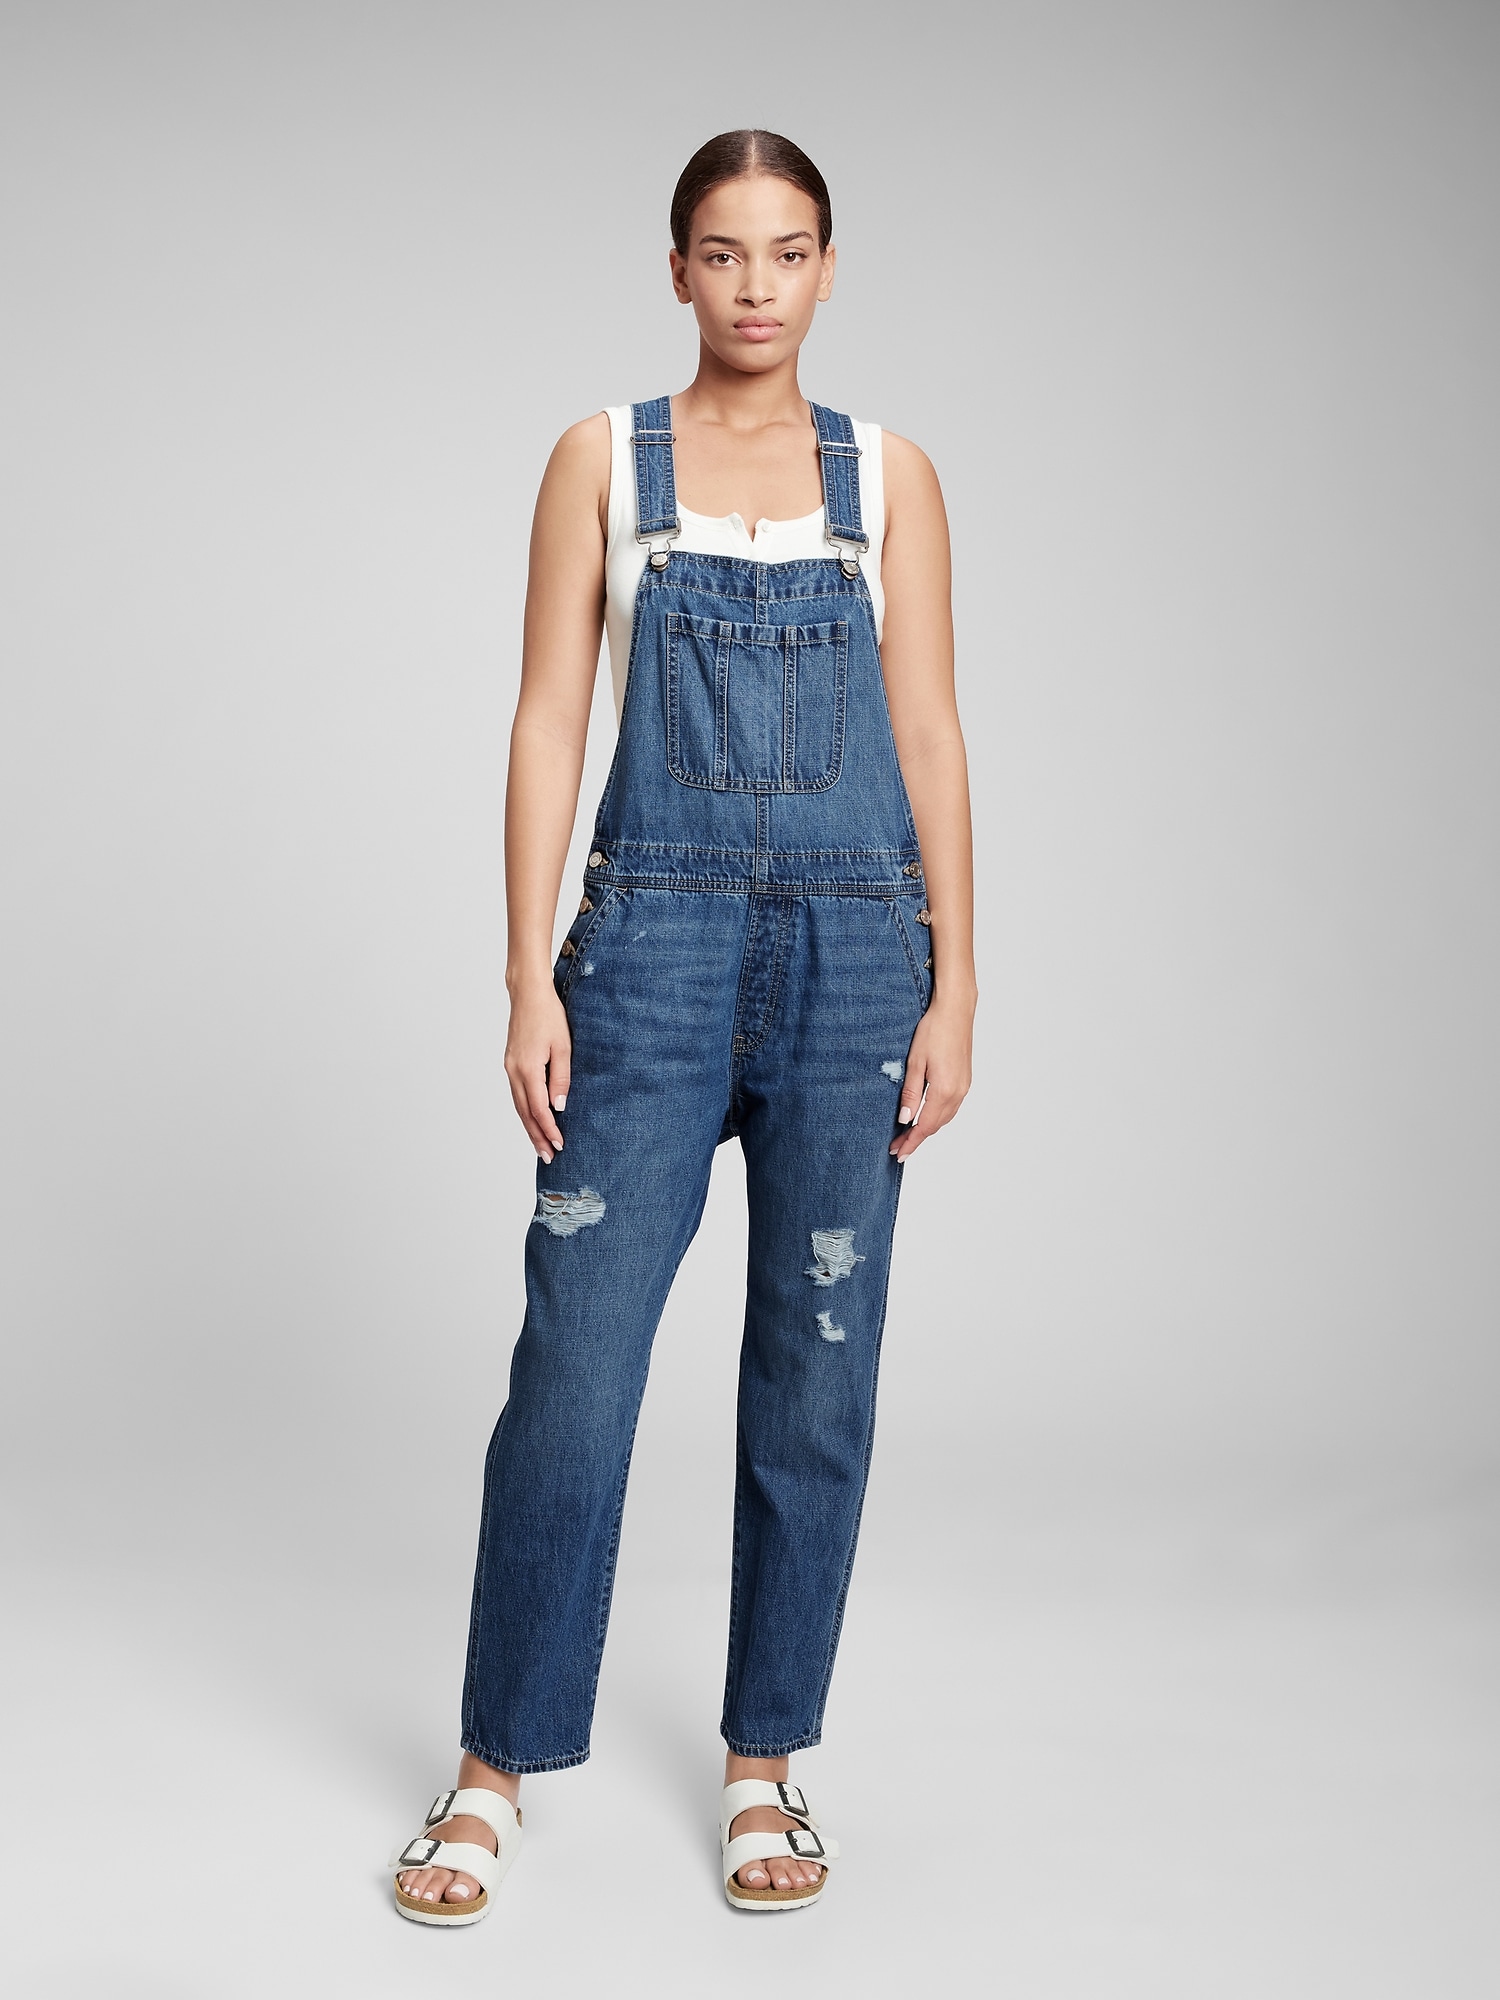 Destructed Denim Overalls with Washwell | Gap Factory